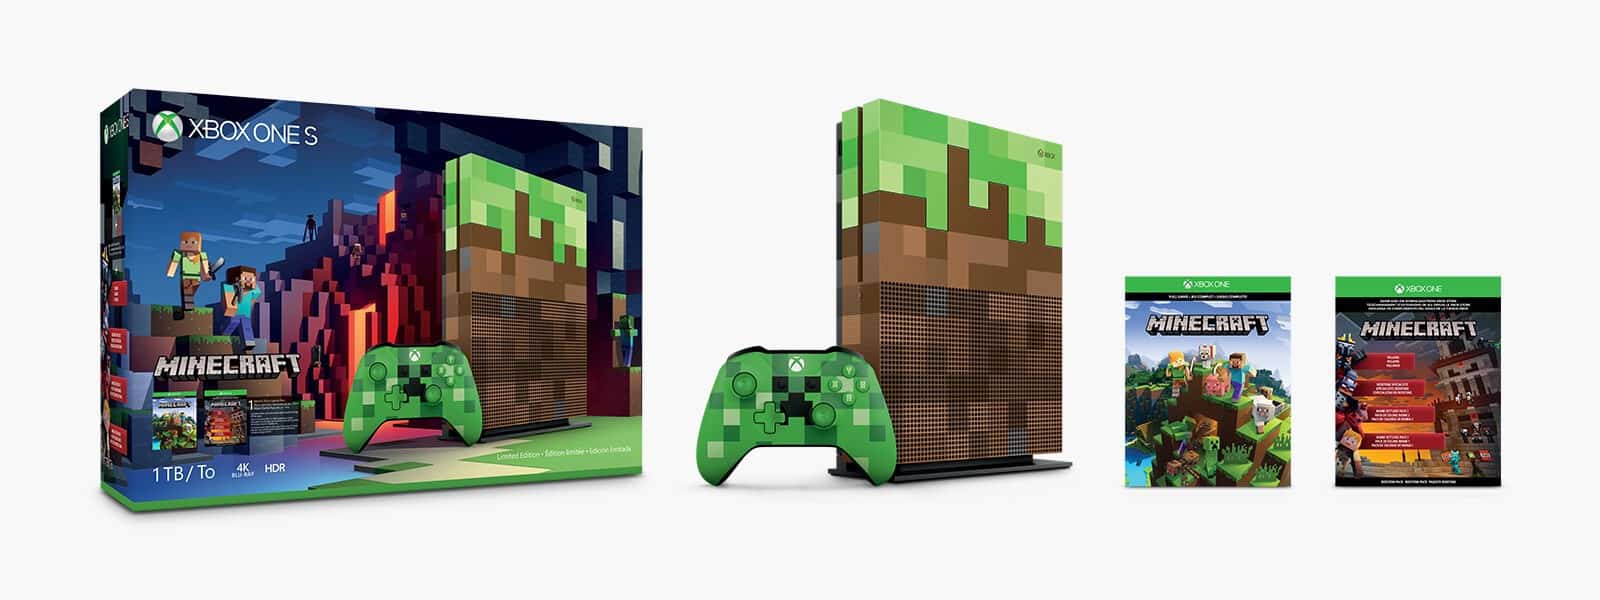 The Xbox One S Minecraft Limited Edition Bundle is now available - OnMSFT.com - October 4, 2017